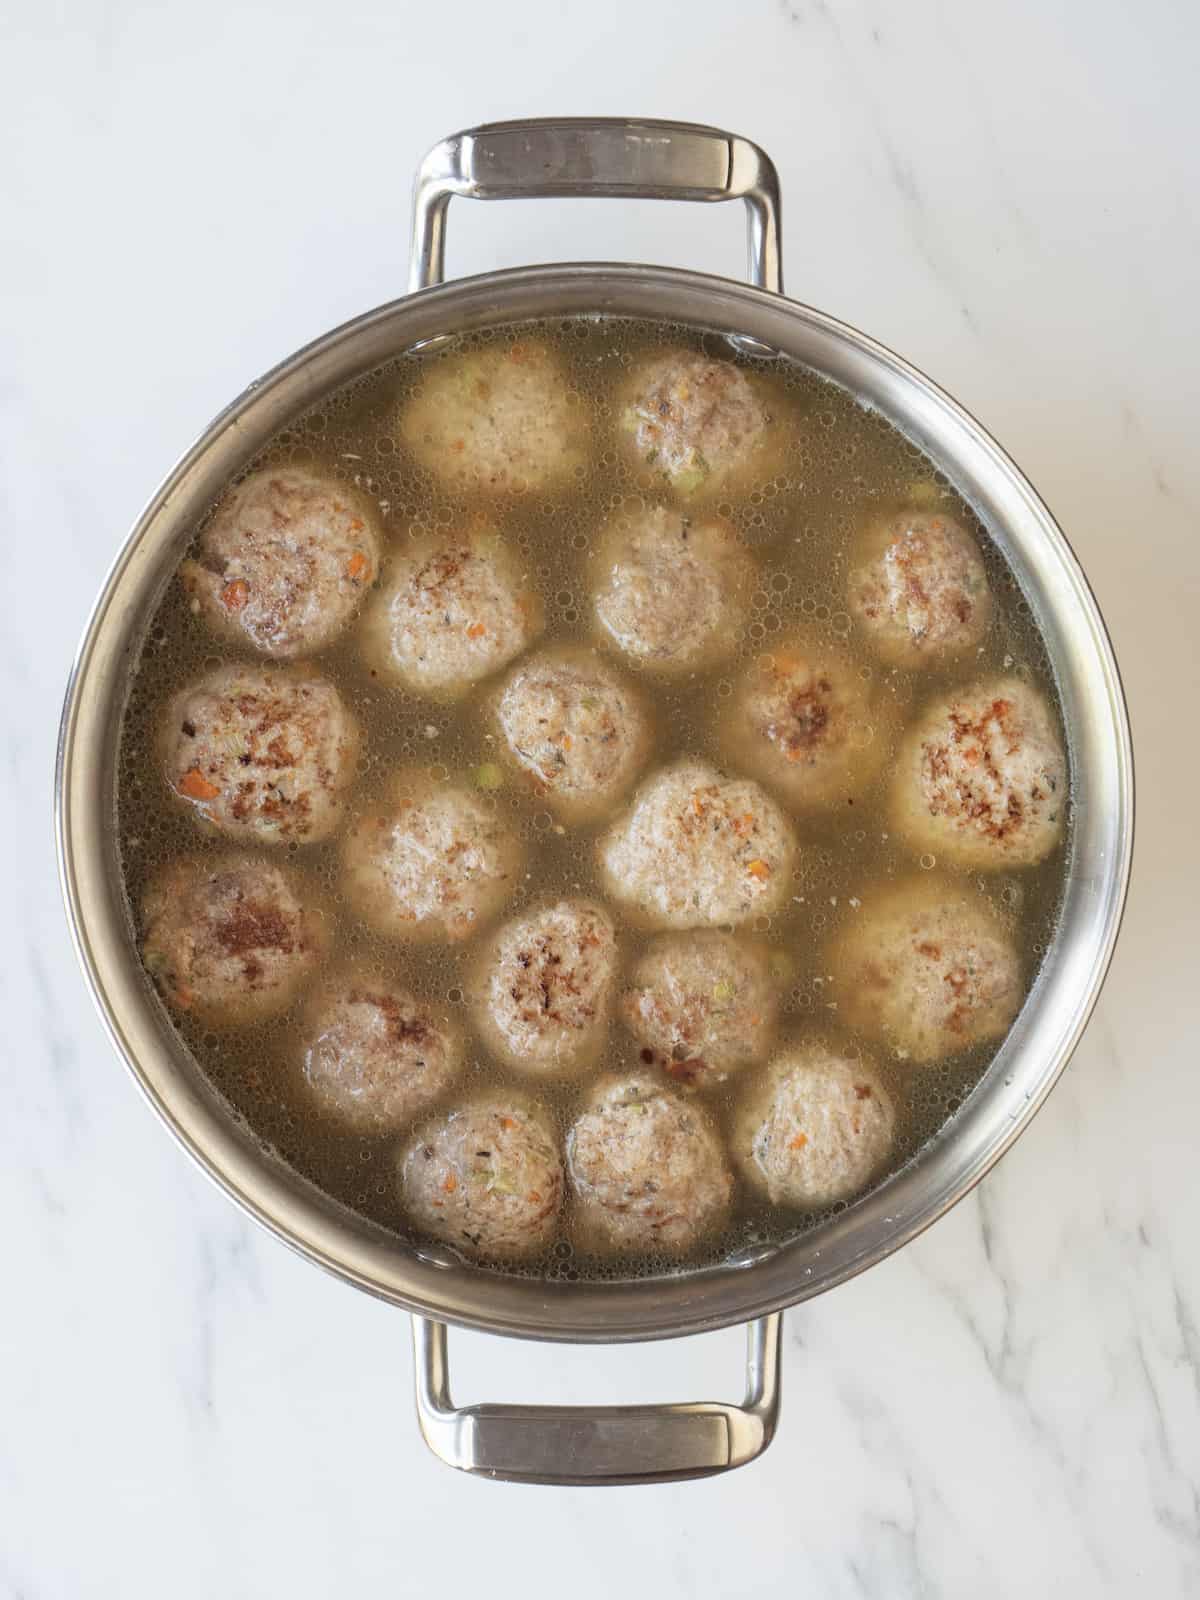 A large saucepan with stock and fried meatballs in it, completed submerged.